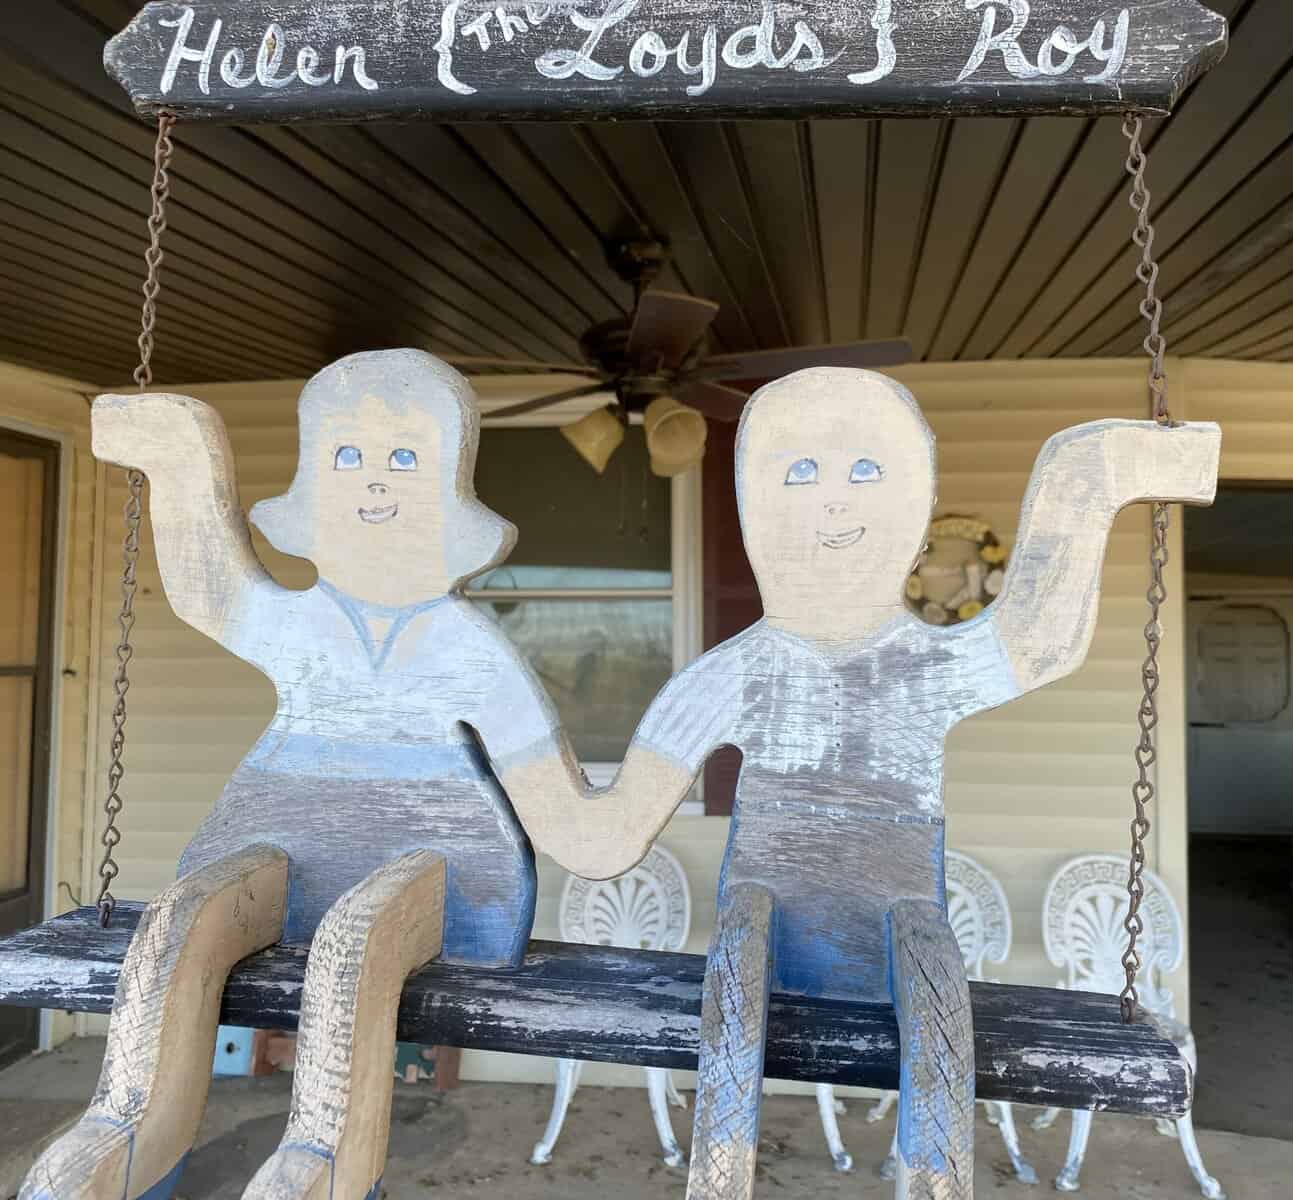 male and female wood cut outs sit on a wooden 'bench' holding hands with a sign above saying Helen and Roy, the Loyd's